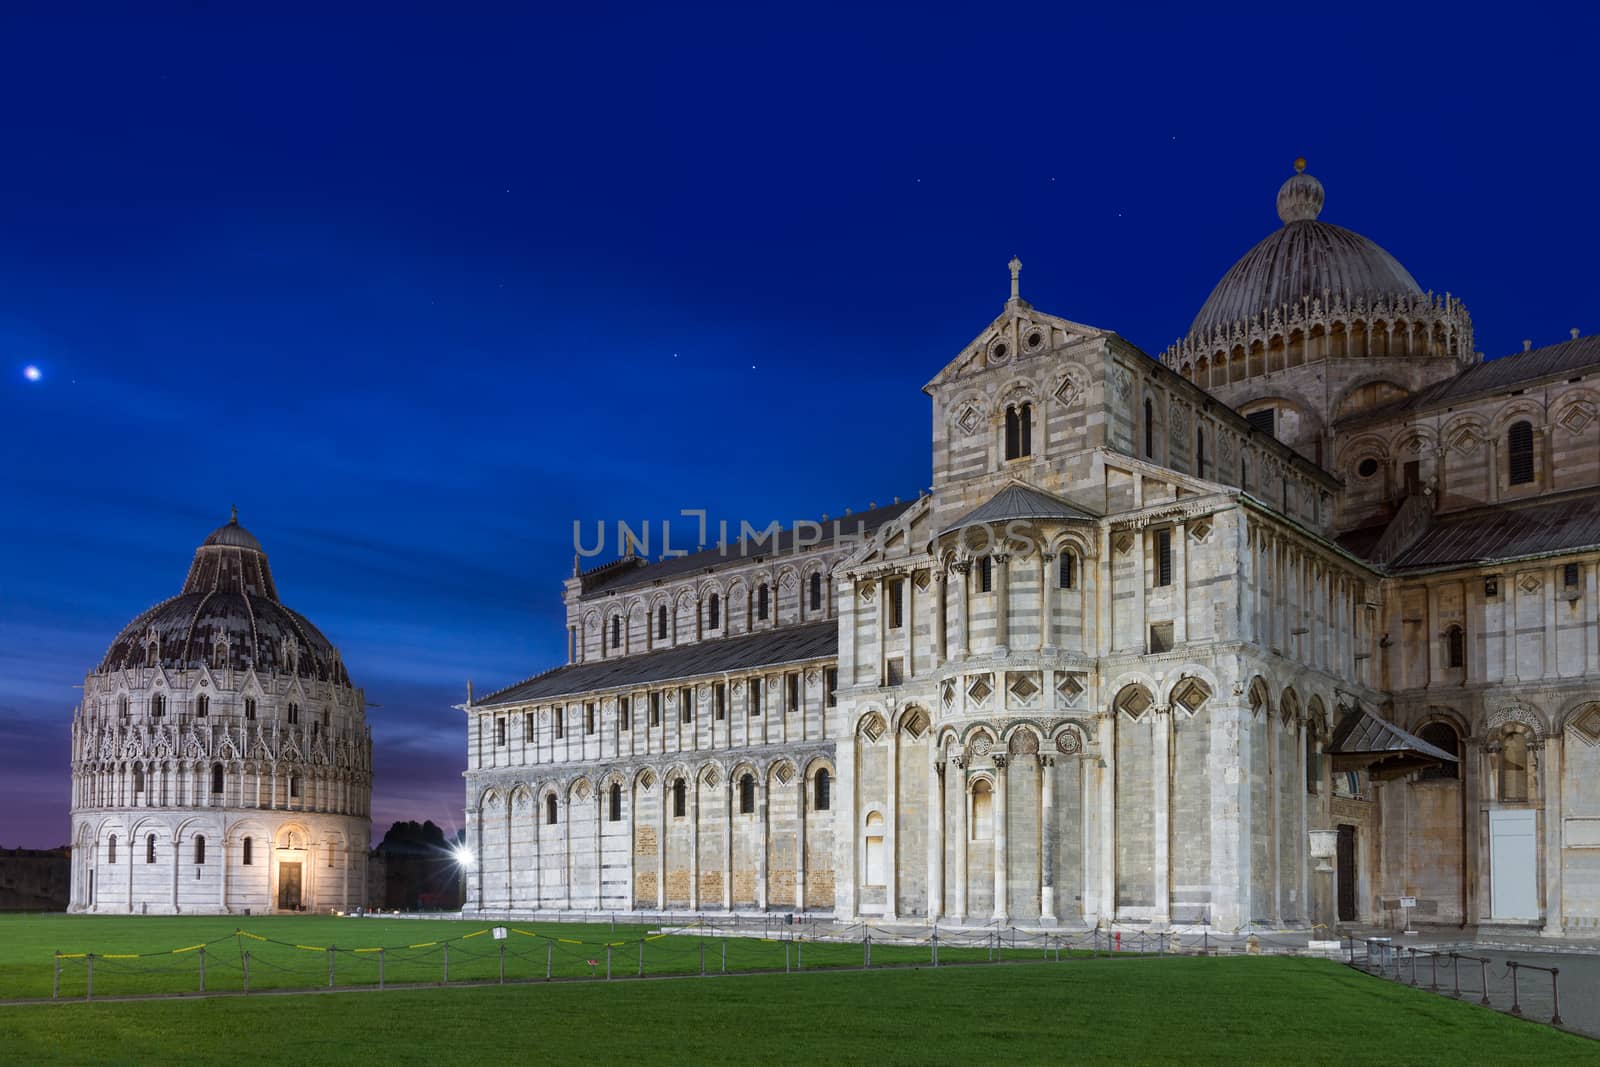 Baptistry and dome of Pisa after sunset, Tuscany, Italy